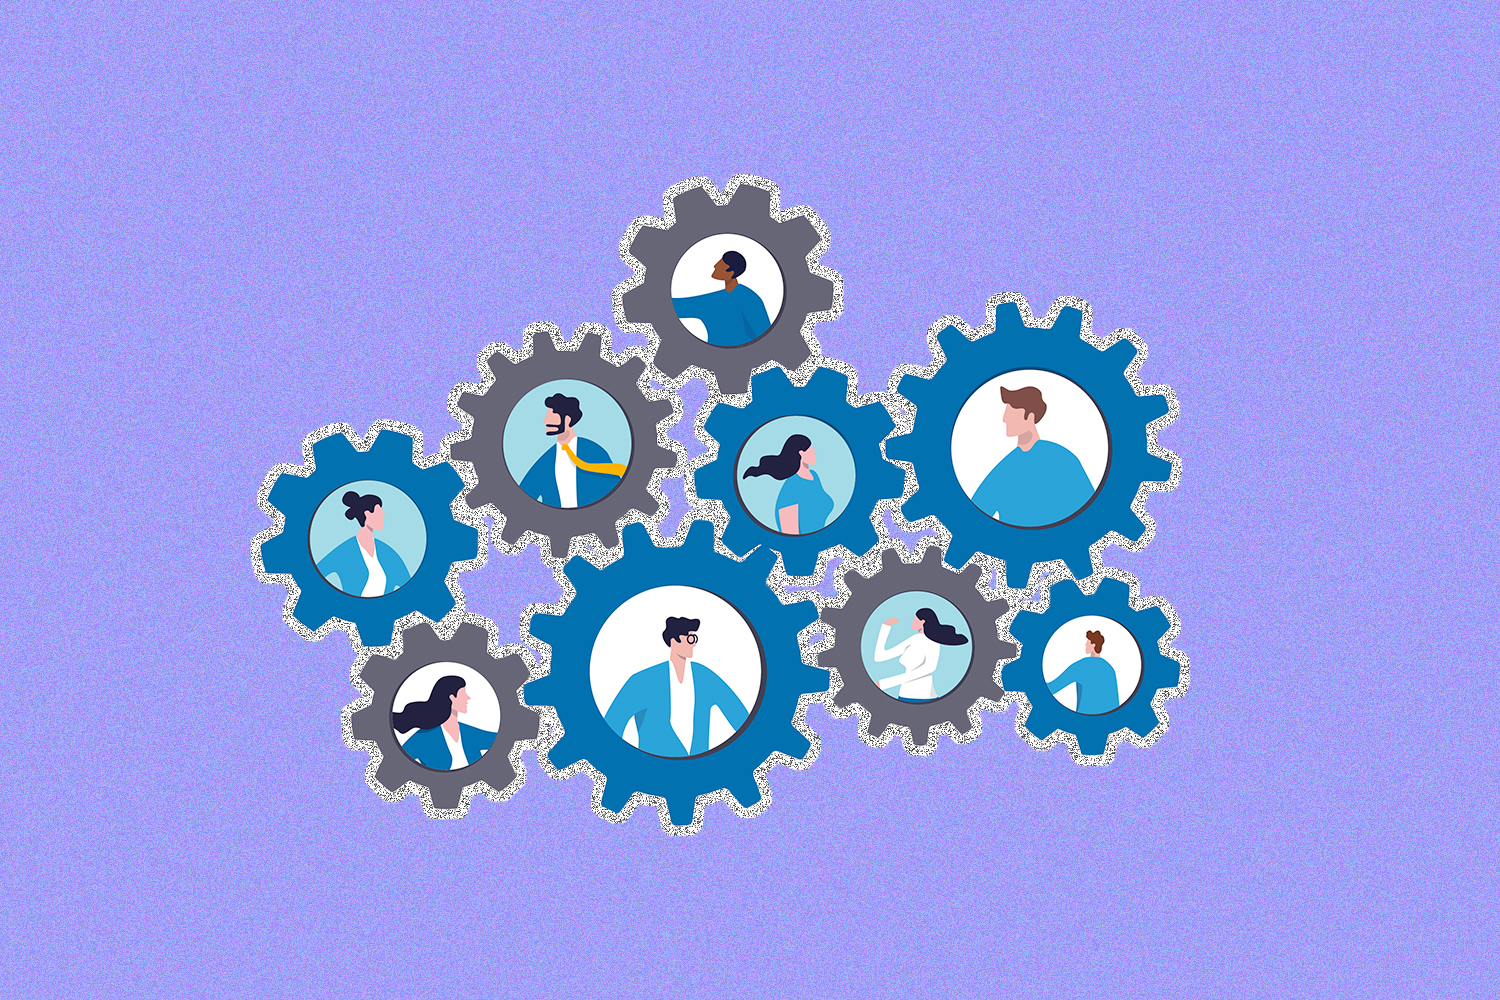 Gray and blue illustrated cogs, each with the illustration of a person in it, on a purple background